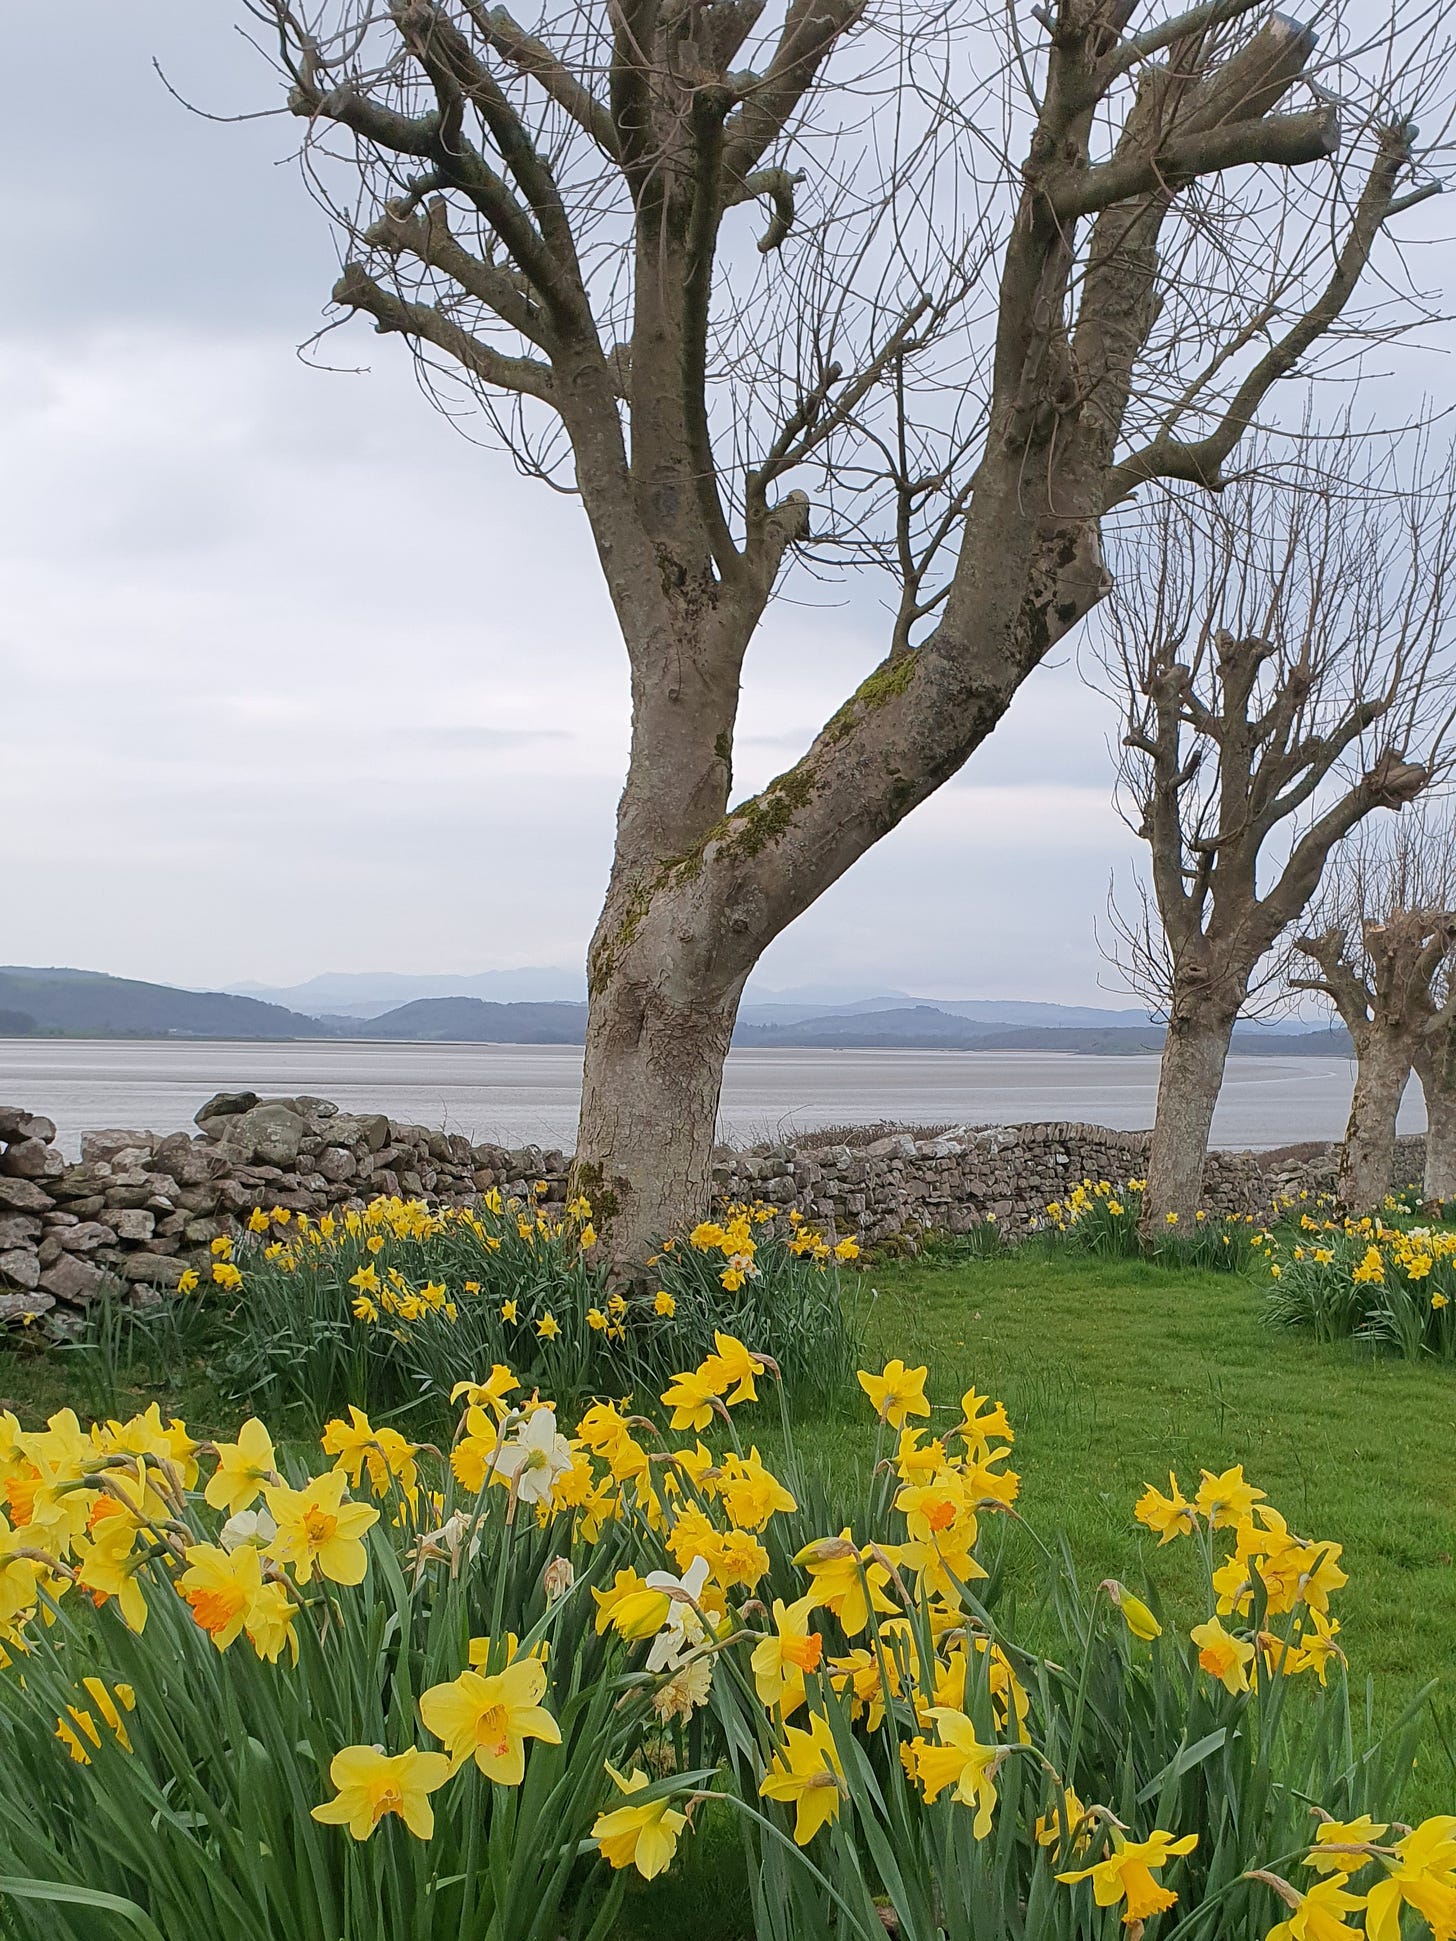 Winter sycamore trees and a dry stone wall line the edge of the Leven Estuary. The Cumbrian mountains are in the distance. The foreground is filled with daffodils.